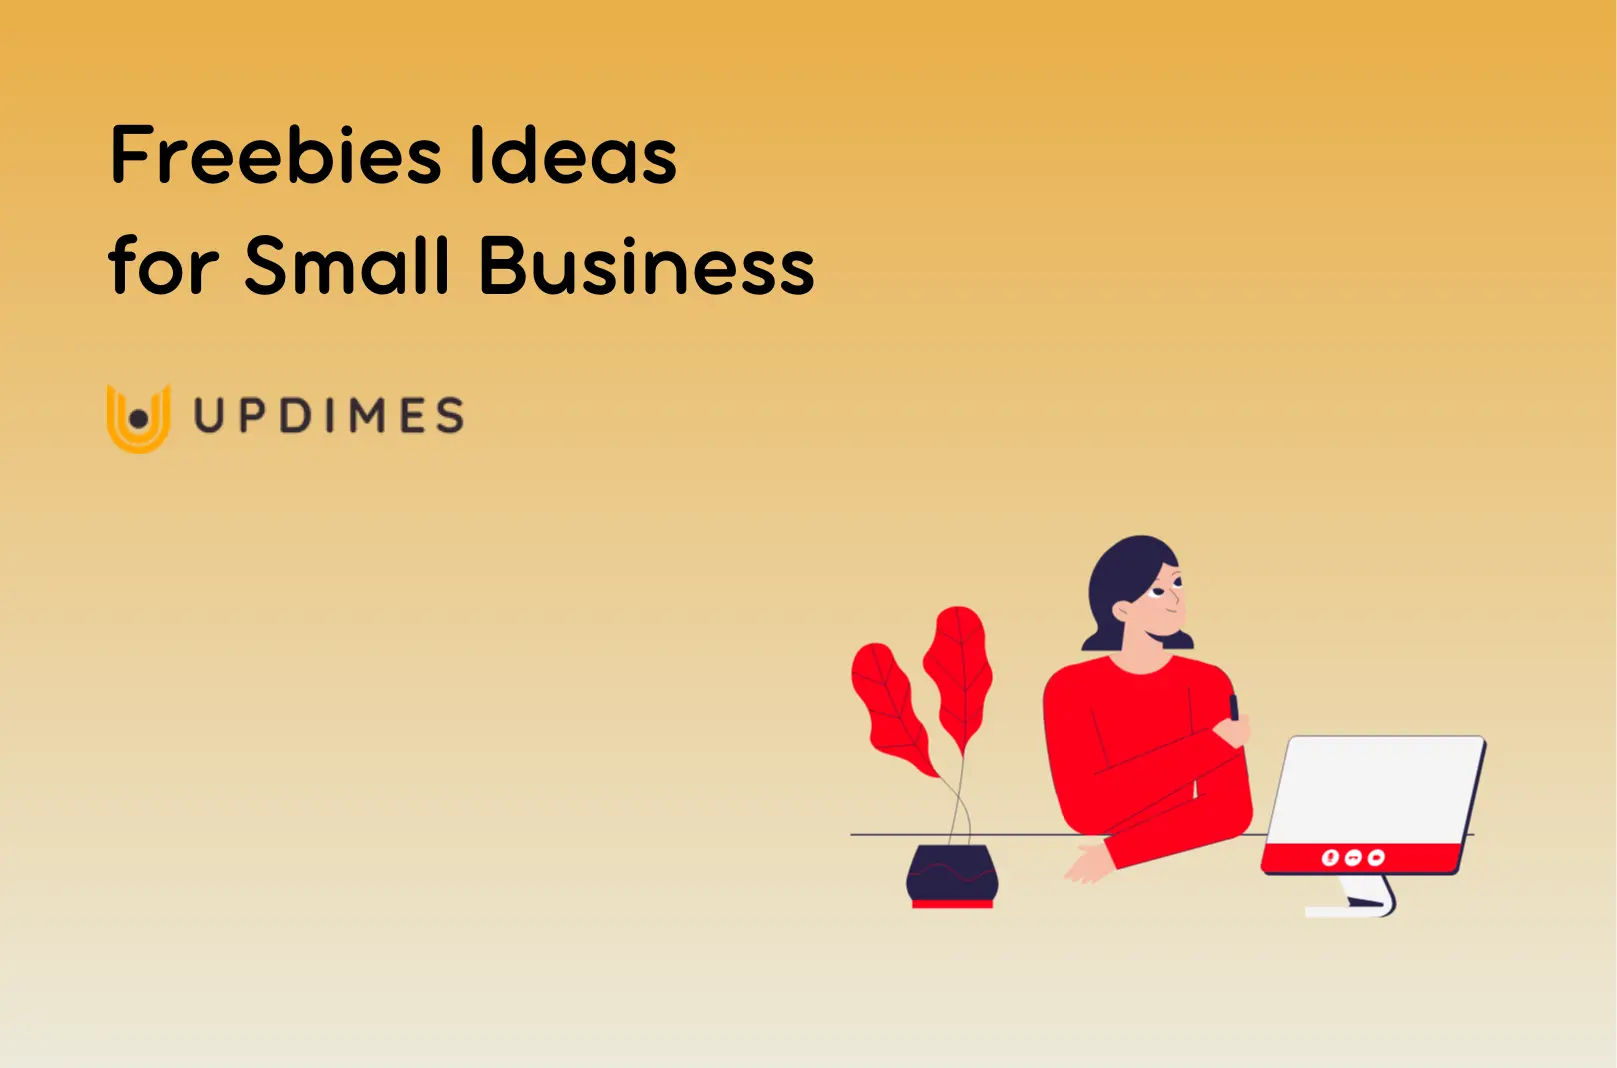 Top 10 Freebies Ideas for Small Business